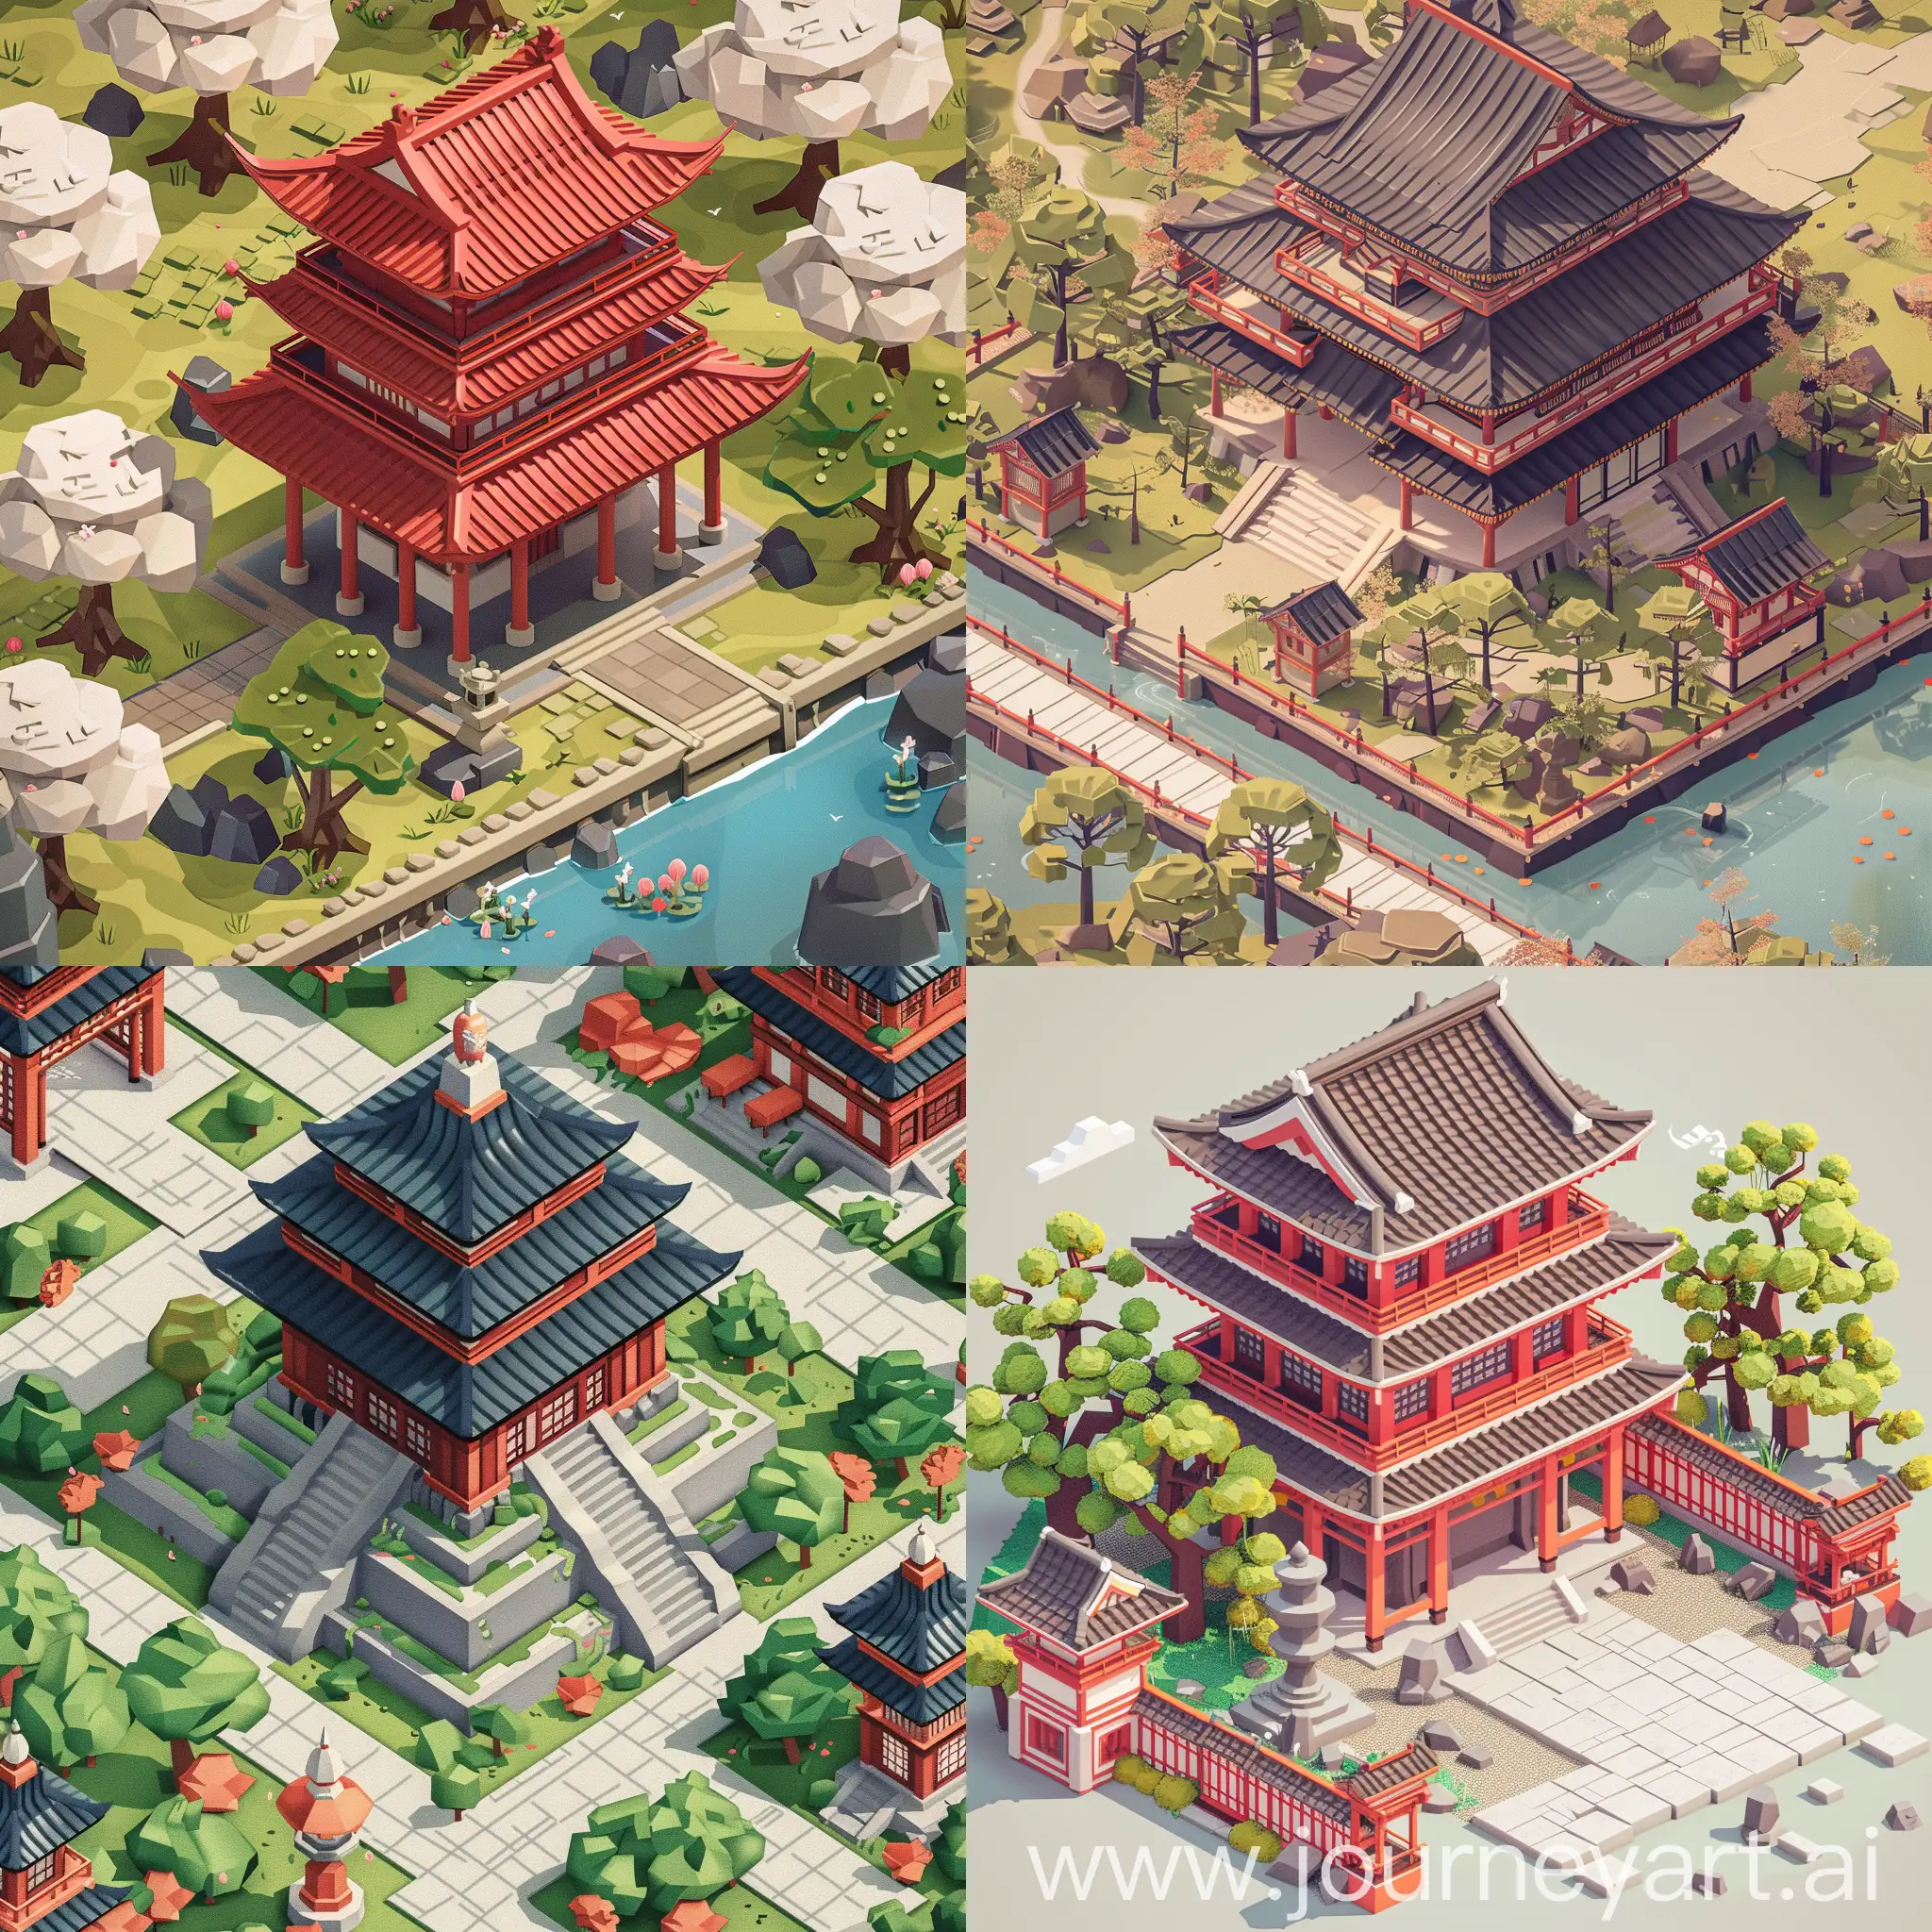 Japanese-Temple-in-Isometric-2D-Game-Style